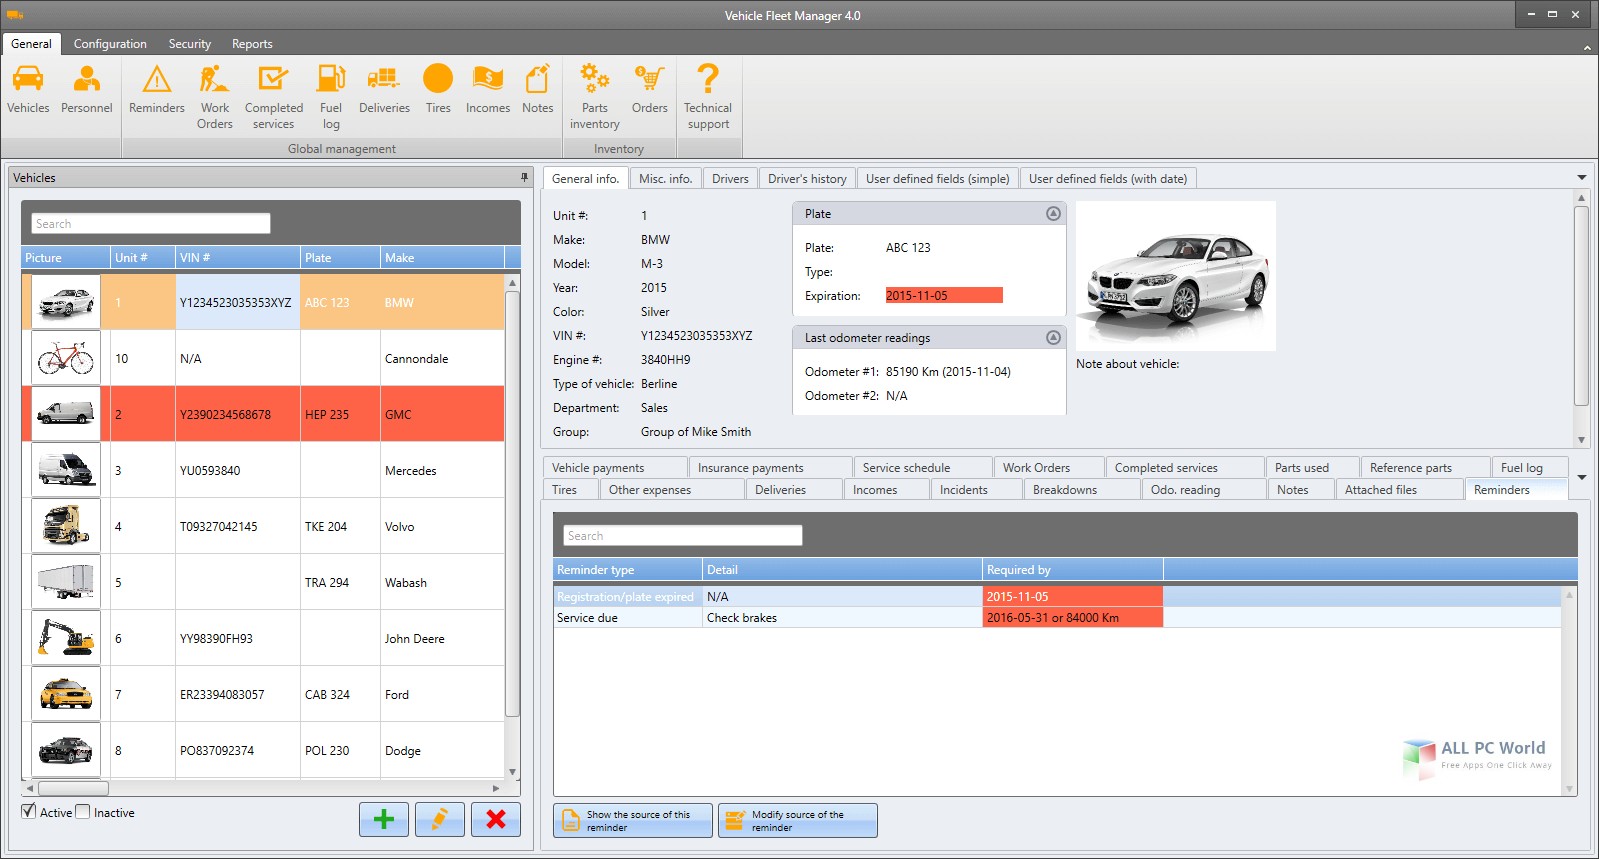 Vinity soft Vehicle Fleet Manager 4.0 Free Download